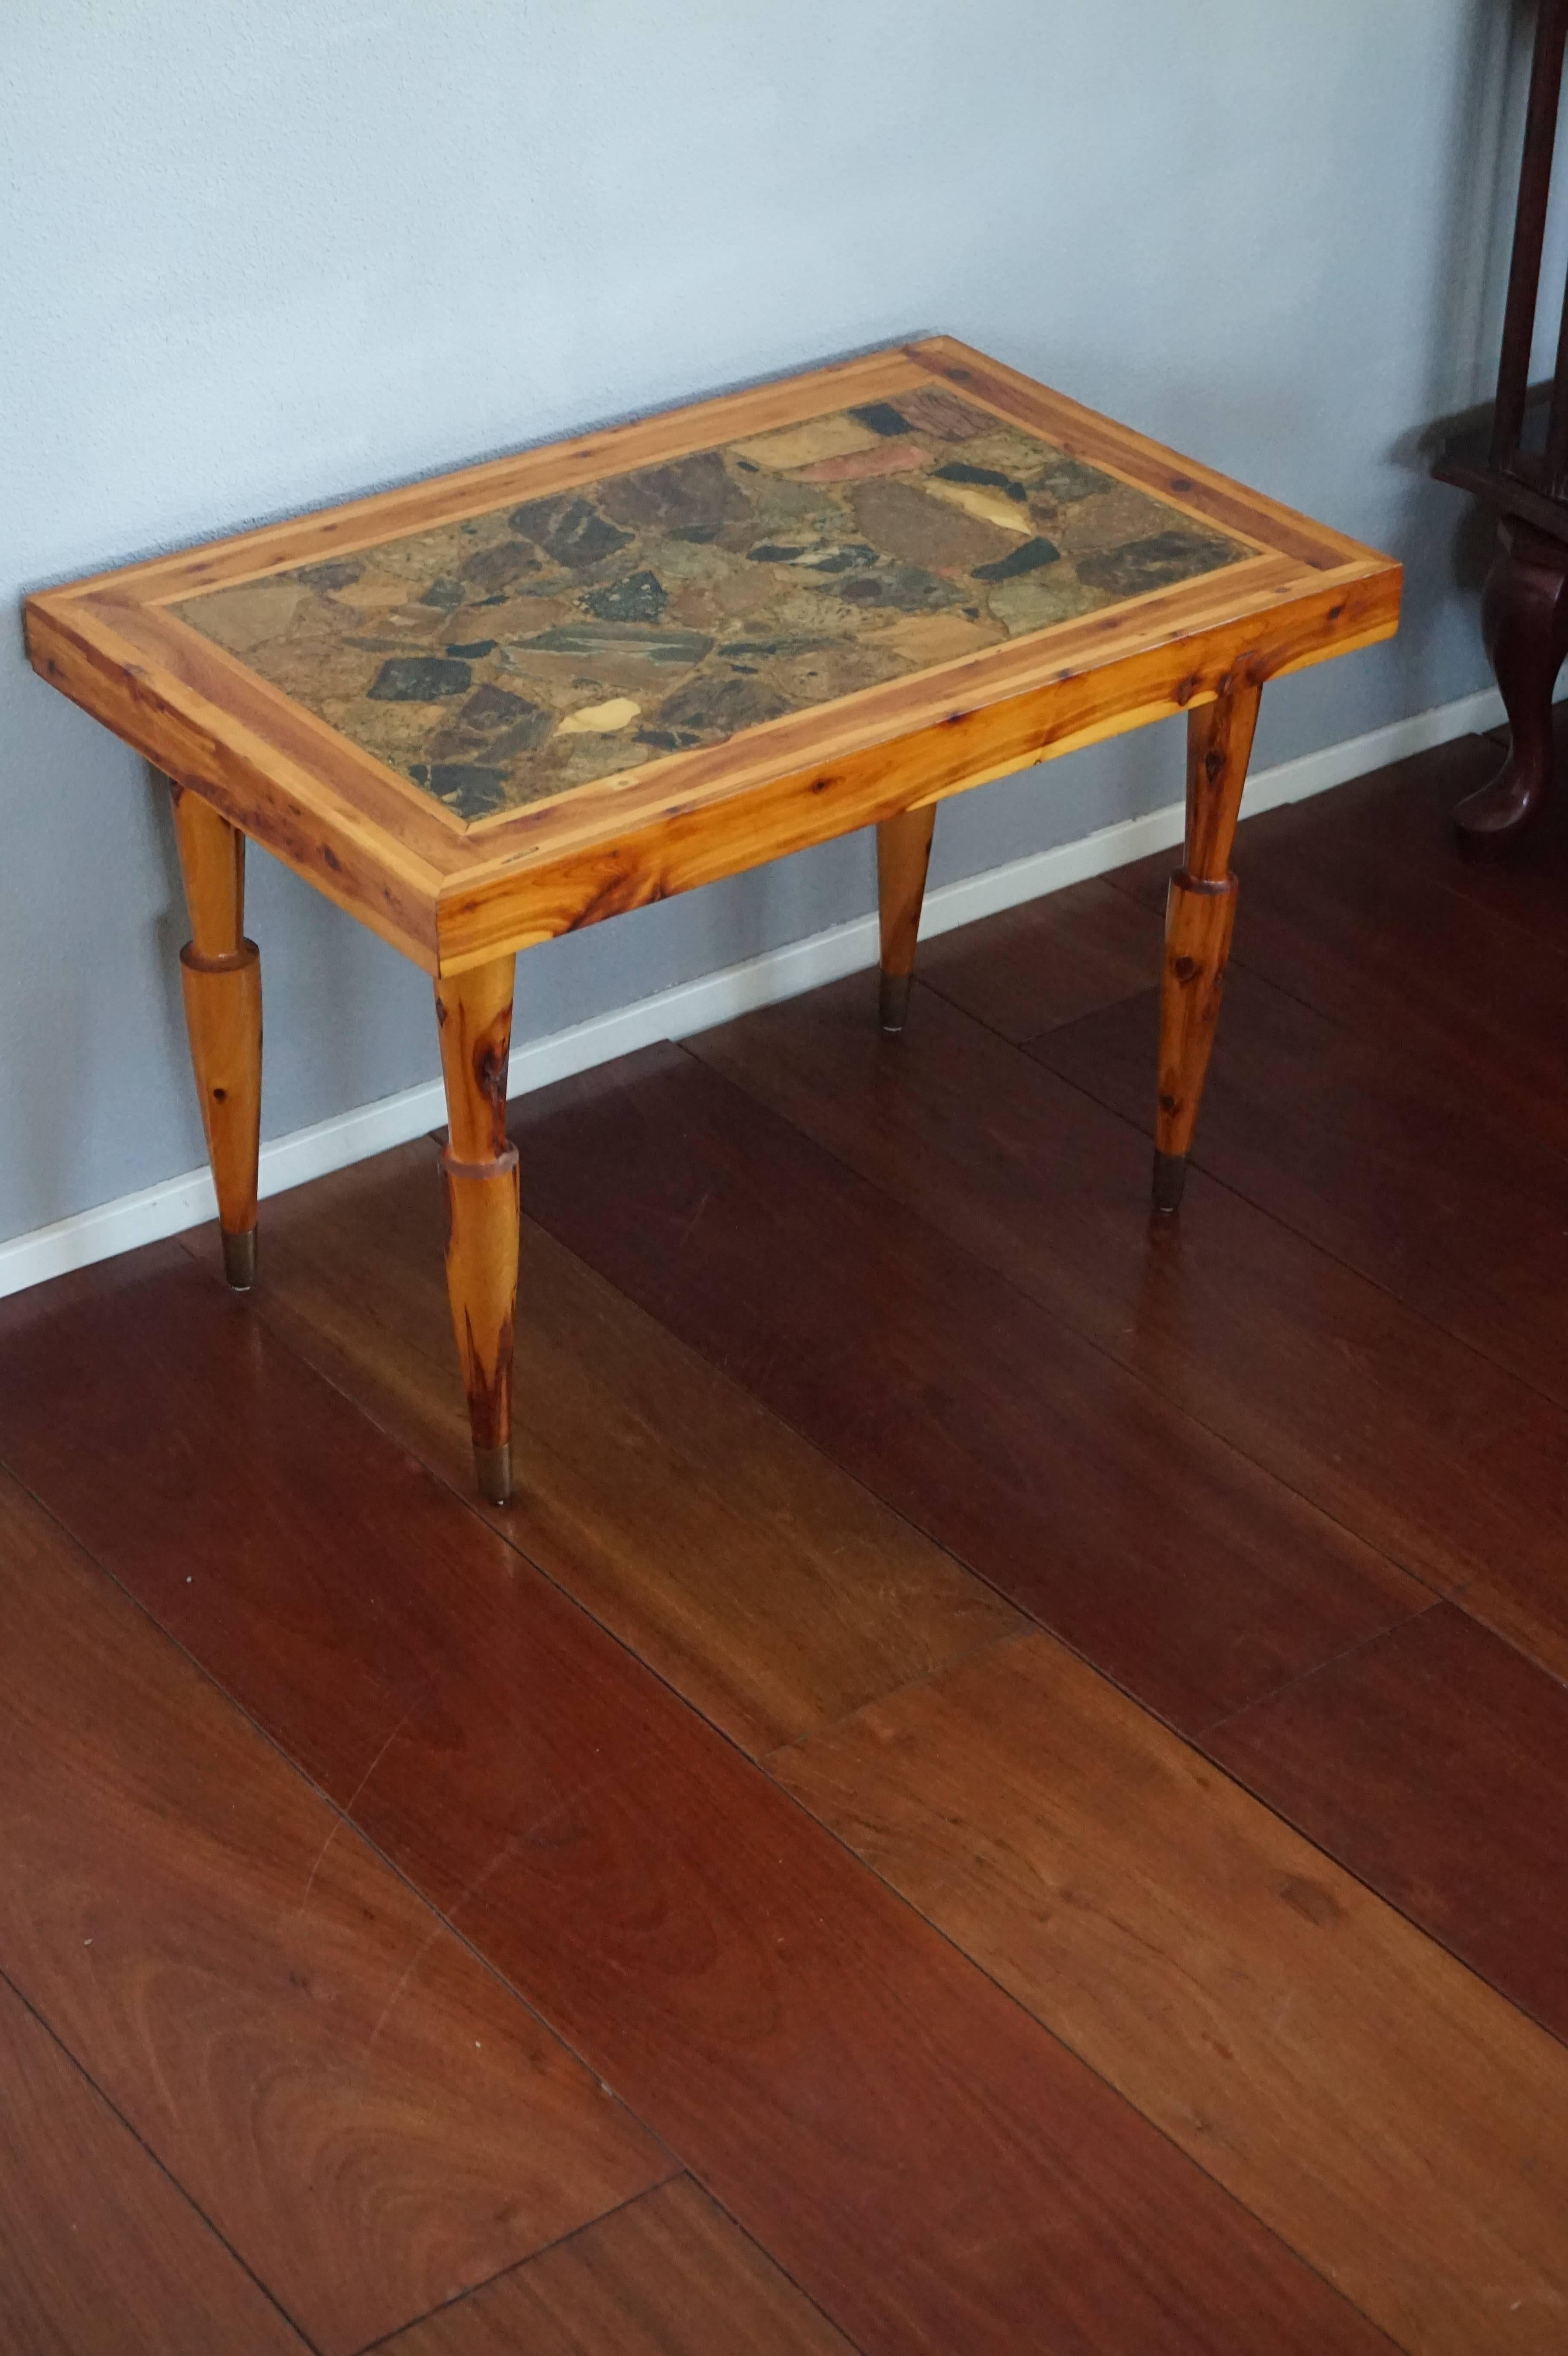 Terrific juniper table inlaid with natural rock made in British Columbia.

This vintage Canadian, juniper coffee table is unique on 1stdibs and extremely rare in the world. We cannot find a second one anywhere in the world. This fine Mid-Century